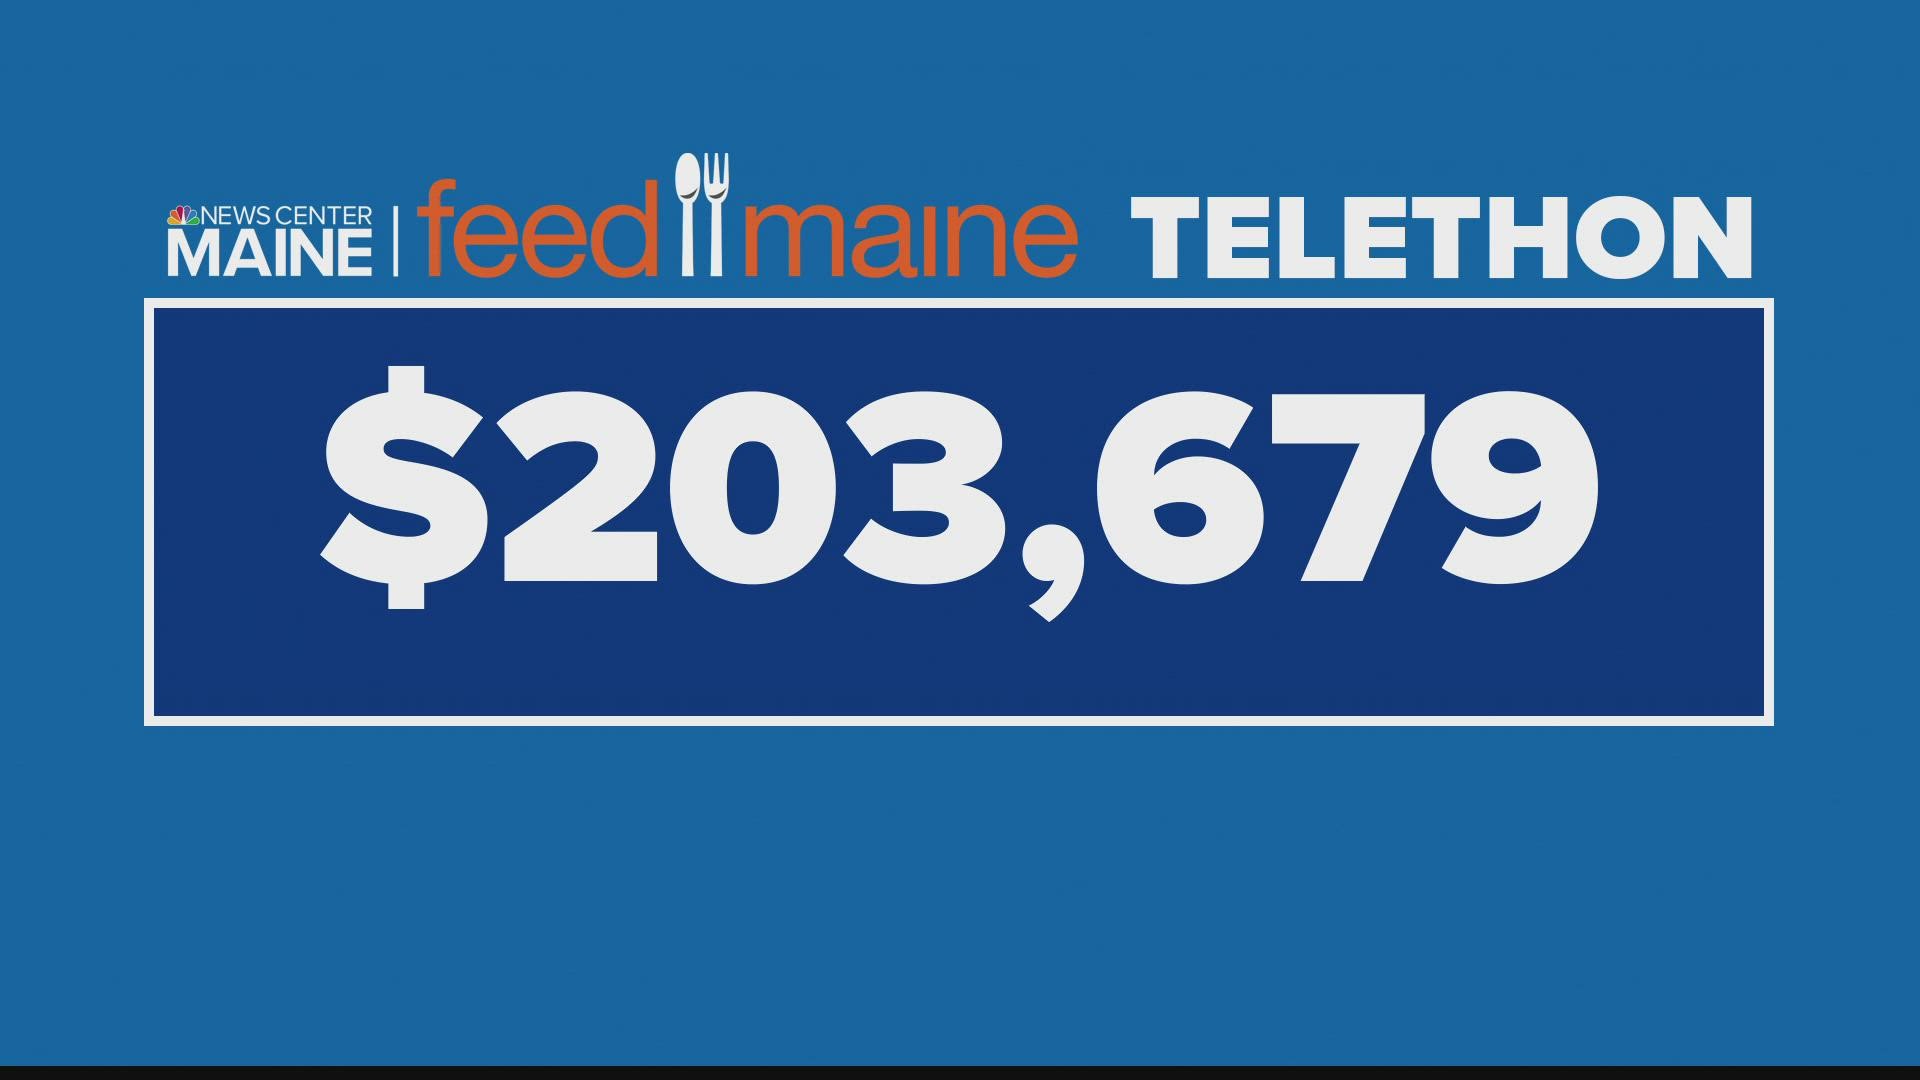 NEWS CENTER Maine's 2022 Feed Maine telethon raised more than $203,000 to help feed hungry Mainers across the state.